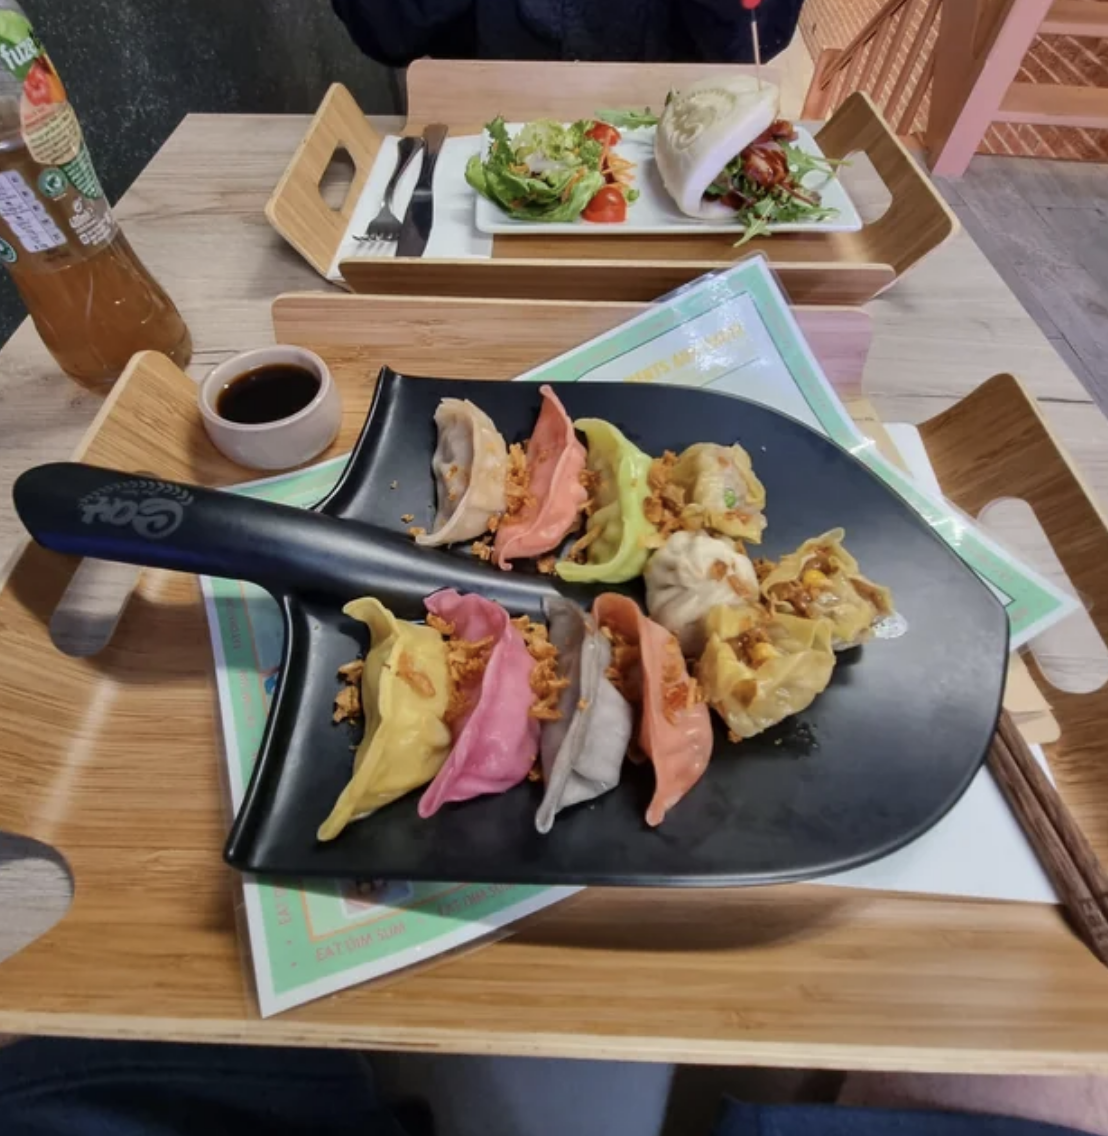 A shovel with different-colored dumplings on it